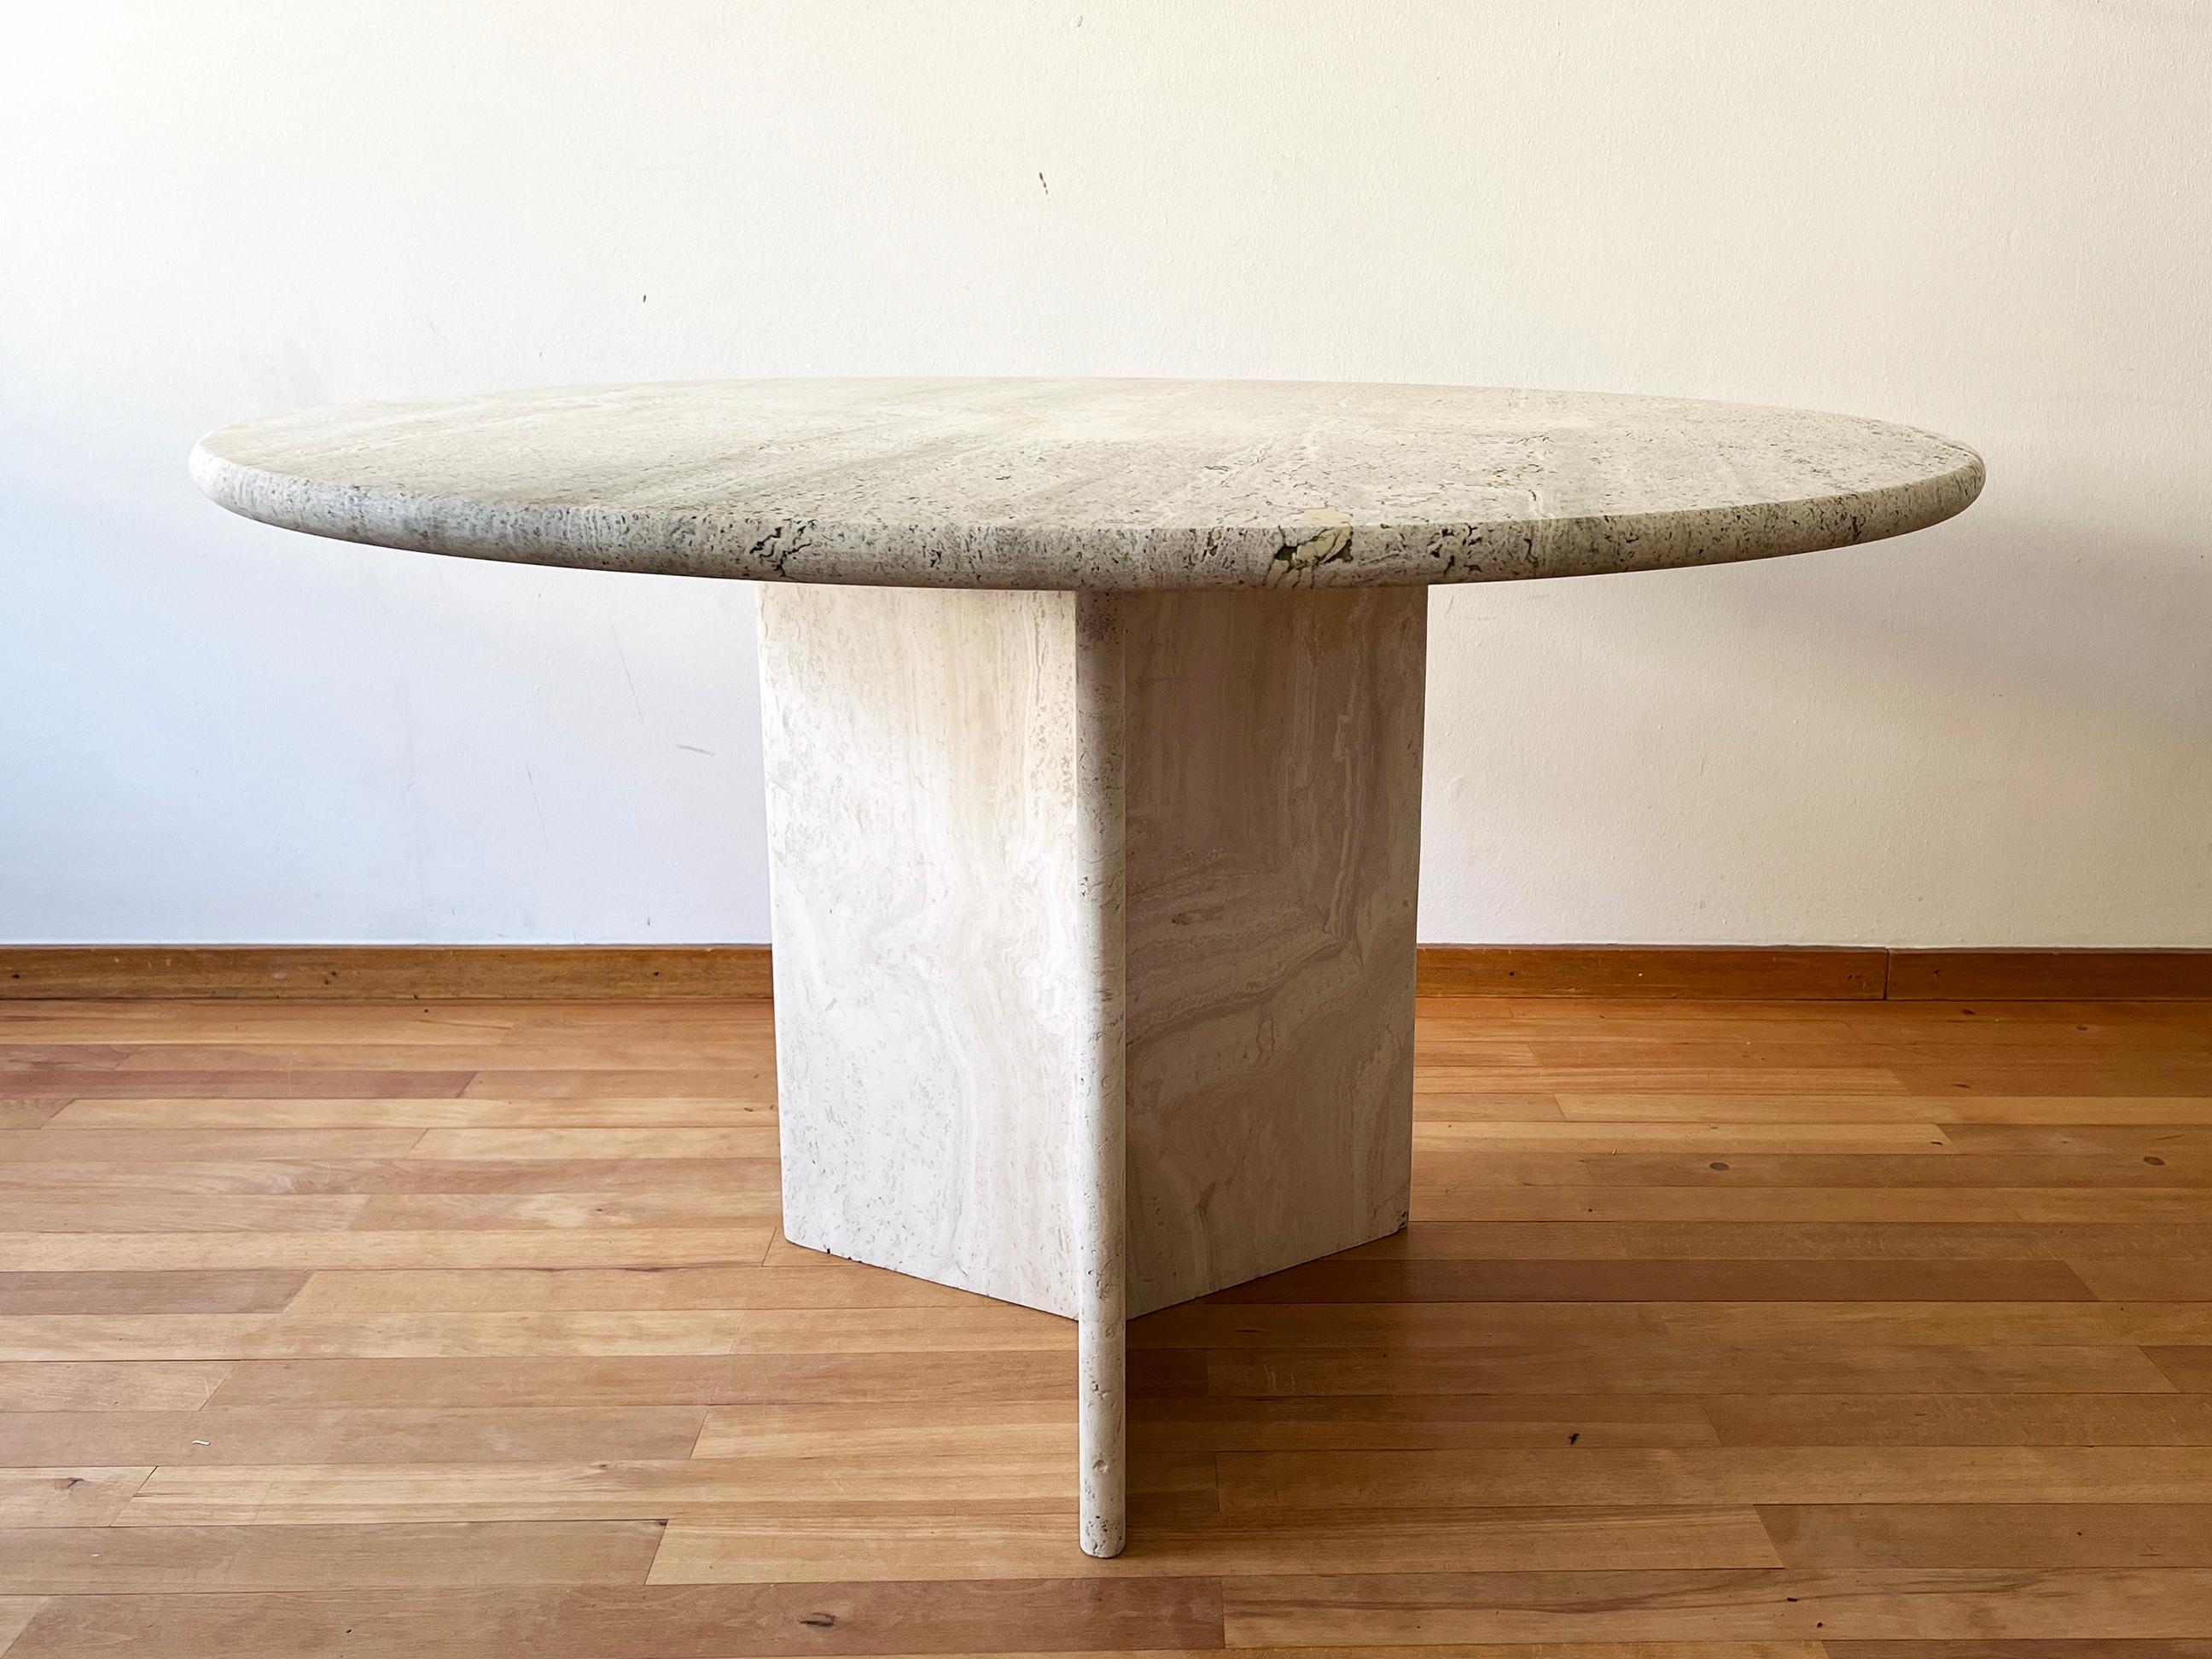 Postmodern 1970s Cream Off White Round Travertine Dining Table, Pedestal Base For Sale 4